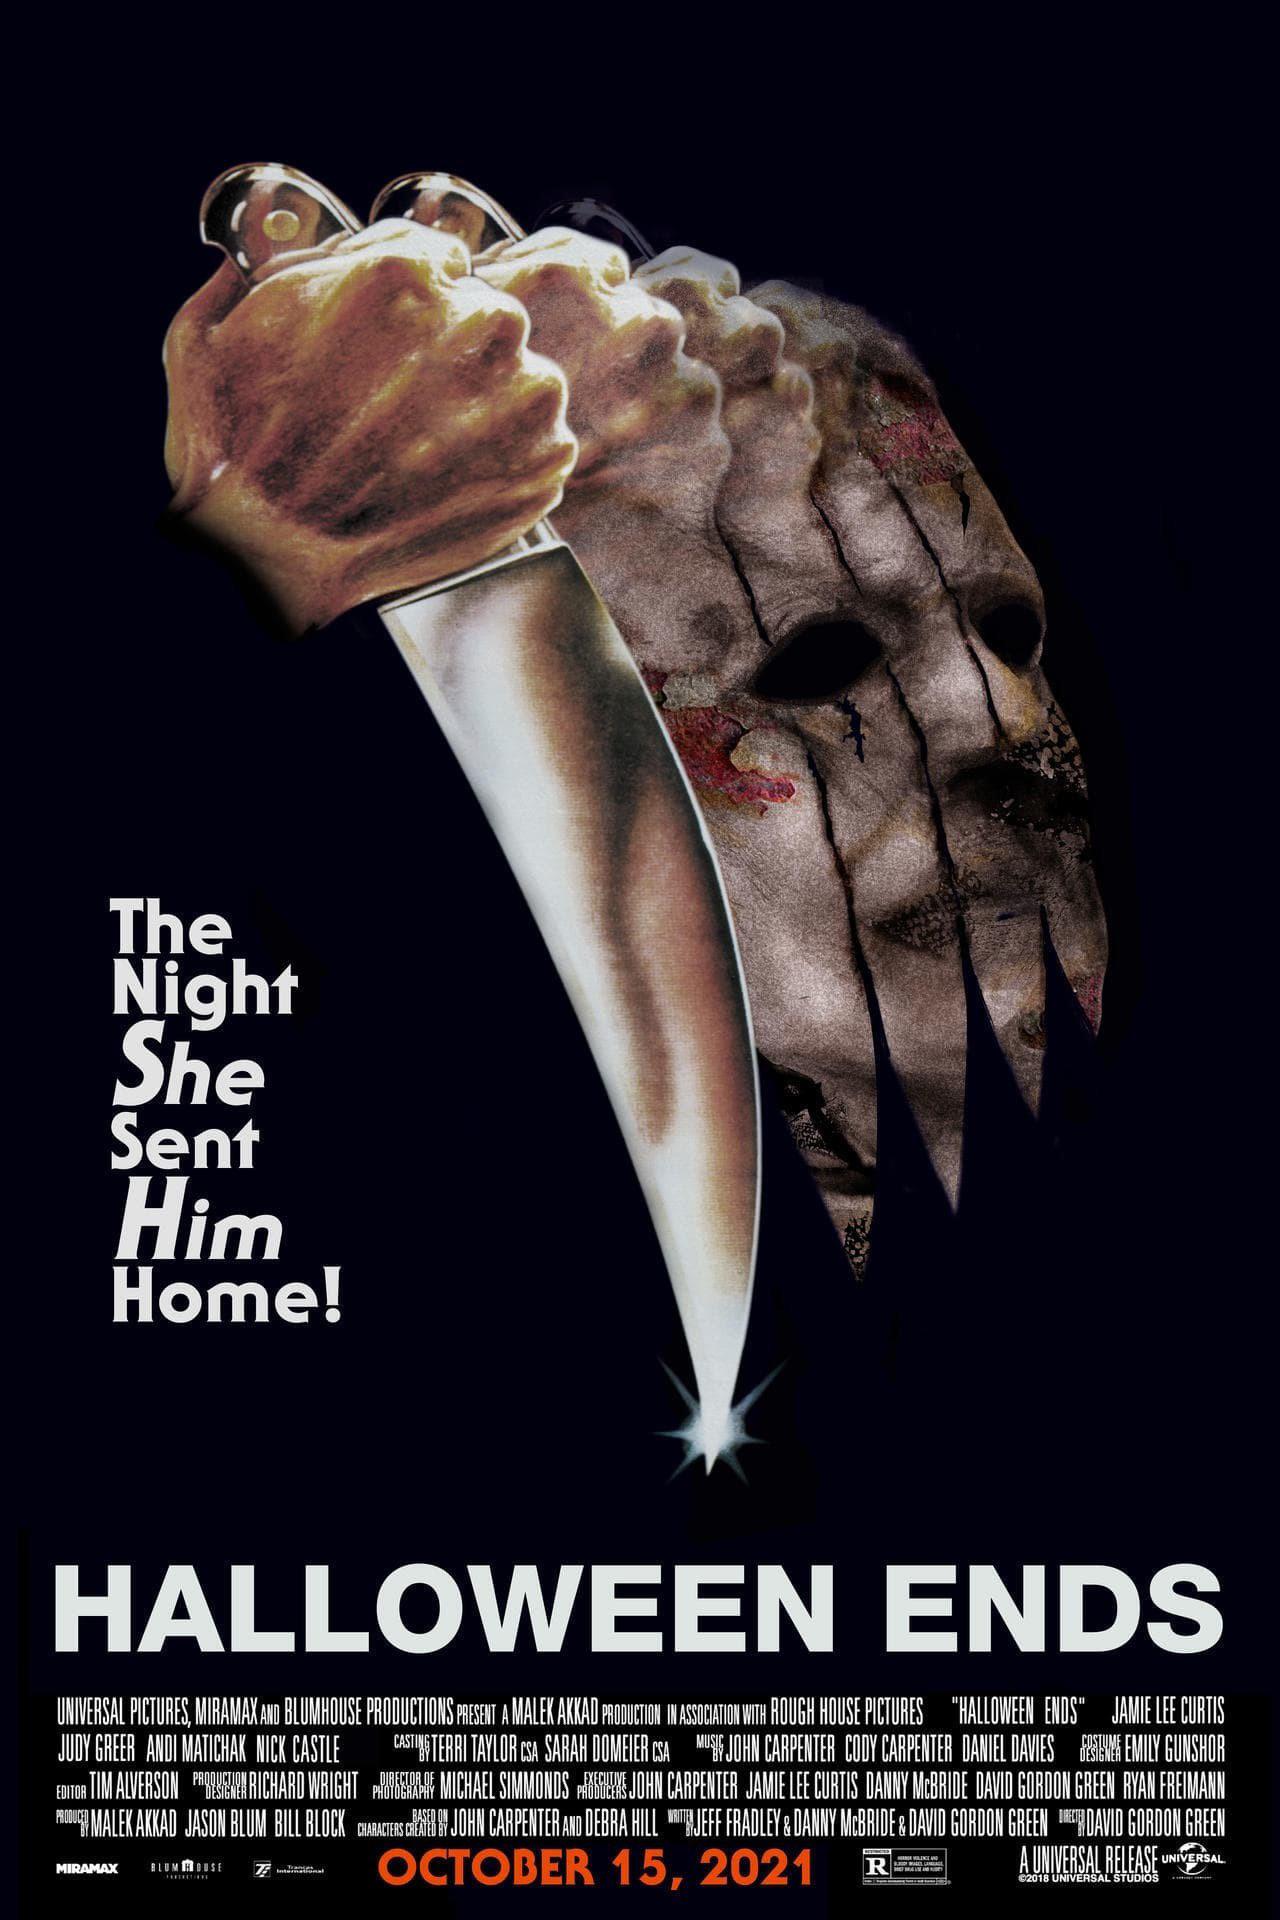 PLAIN & SIMPLE, what do you want to see in Halloween ends? And what don't you want to see as well?